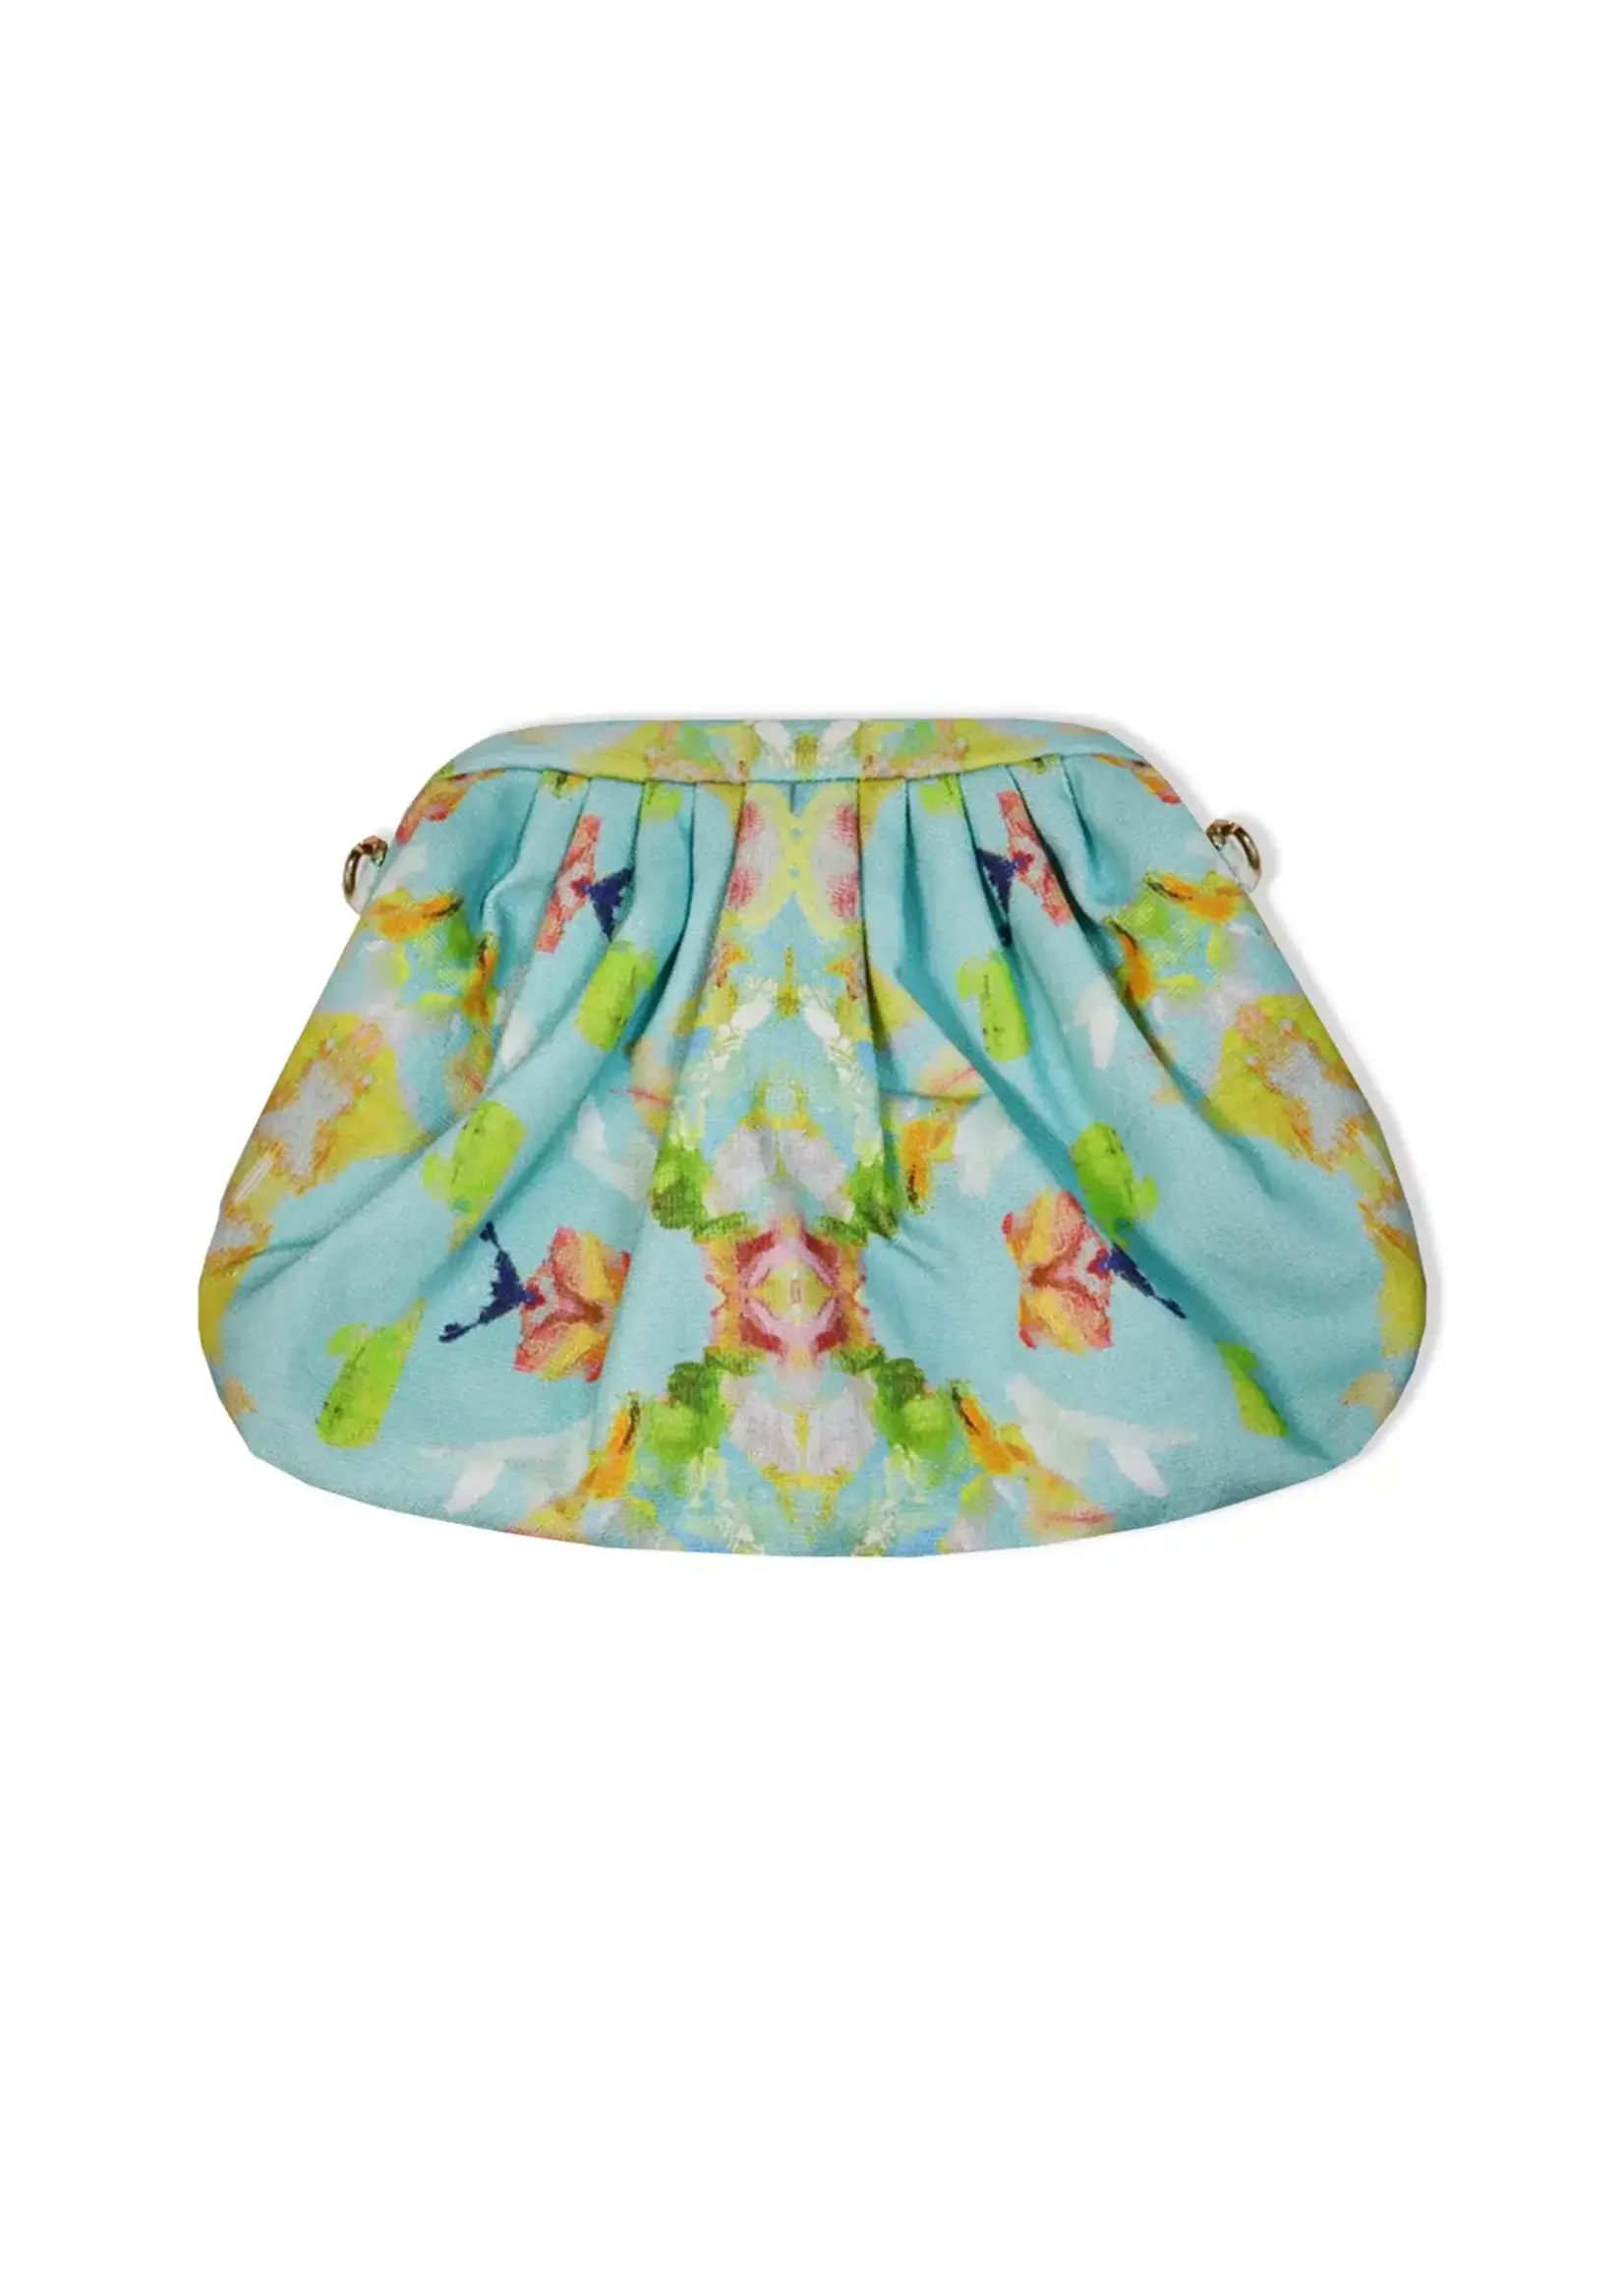 Brooks Ave. Brooks Ave. Dumpling Clutch - Stained Glass Teal